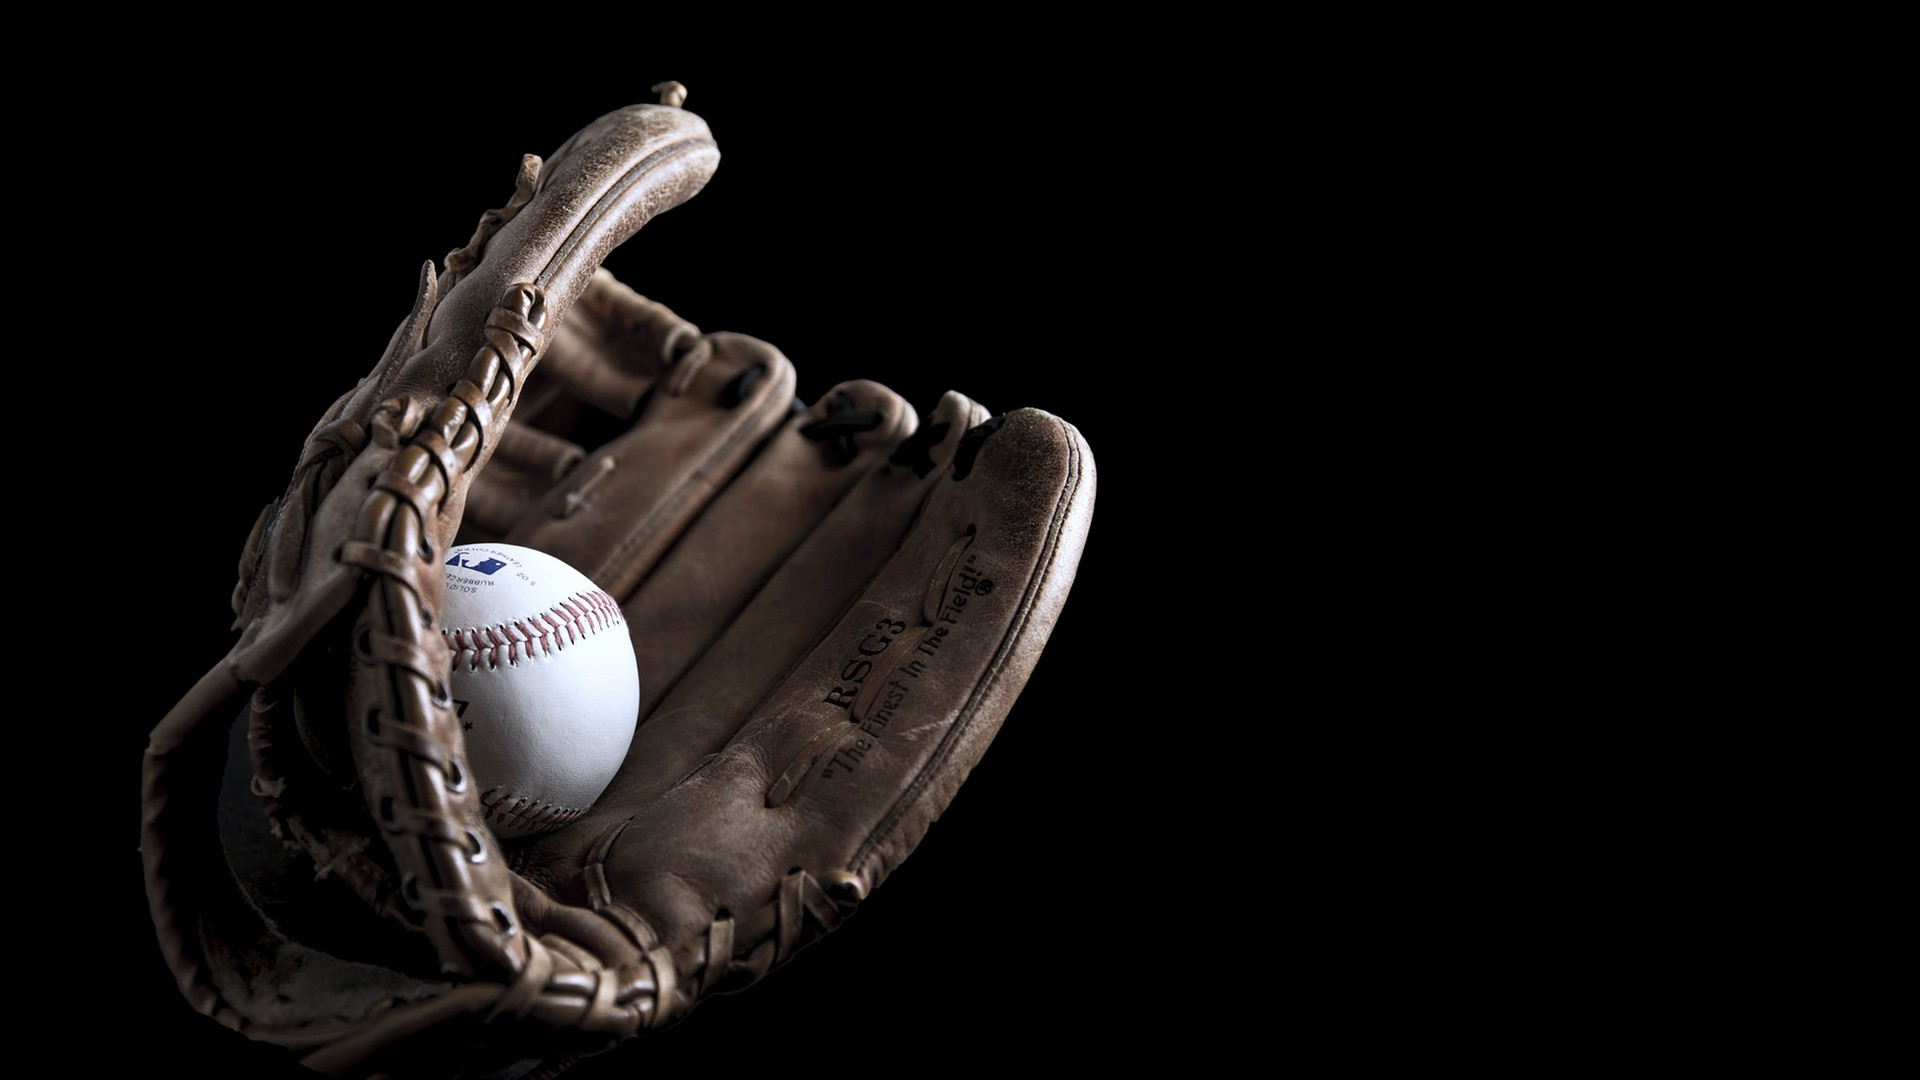 Cool Baseball Wallpaper For Mac With high-resolution 1920X1080 pixel. You can use this wallpaper for Mac Desktop Wallpaper, Laptop Screensavers, Android Wallpapers, Tablet or iPhone Home Screen and another mobile phone device